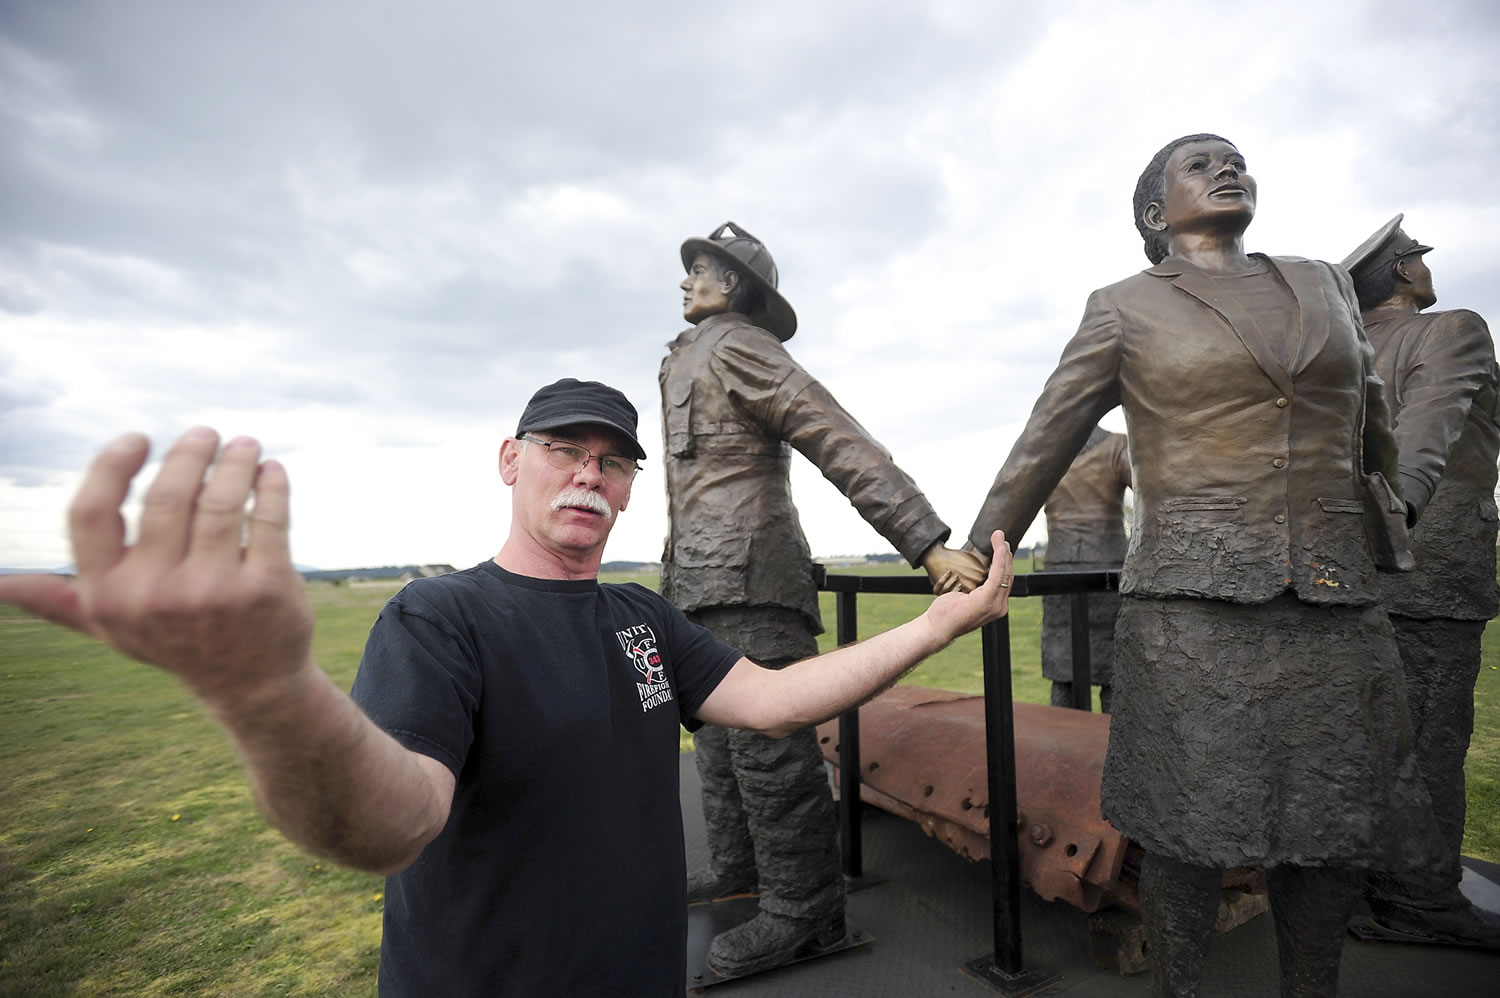 John Jackson explains the significance of statues holding hands in his 9/11 monument at his home in Tenino. Jackson, who worked with the Spirit of America Foundation, built the sculpture in honor of people affected by the Sept.